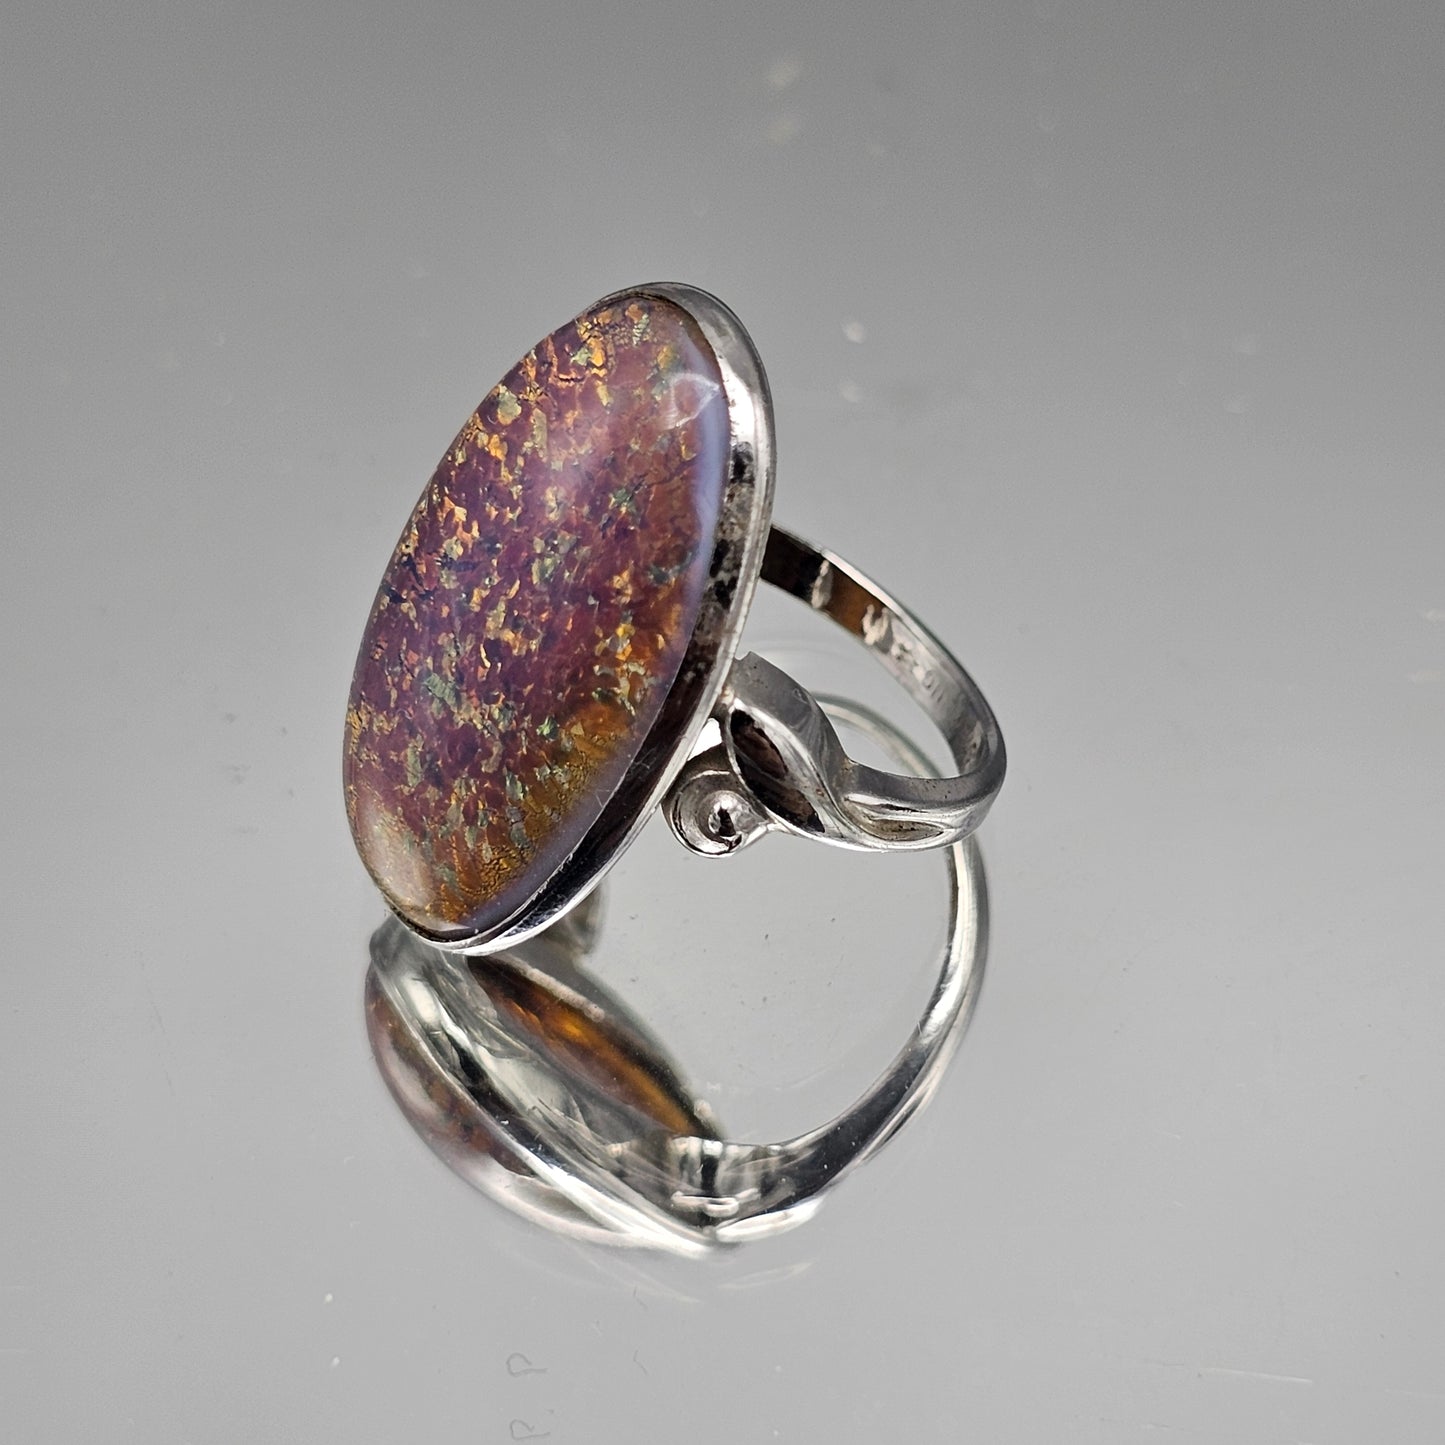 Vintage Sterling Silver Ring with Harlequin Glass / Fire Opal